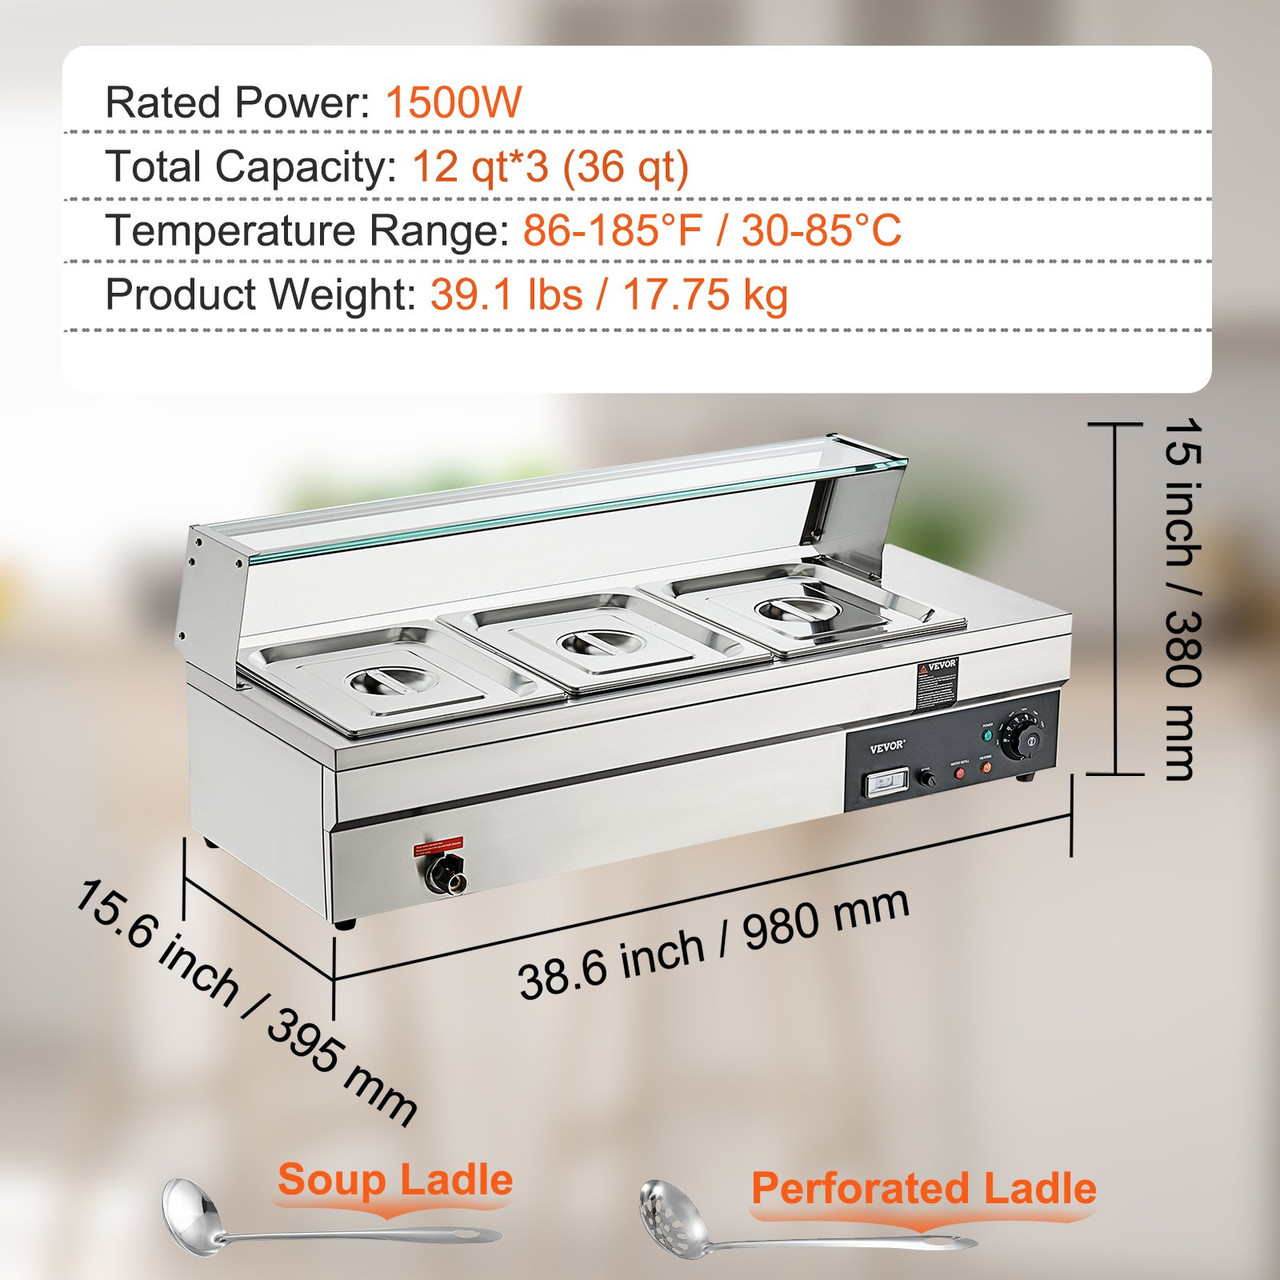 3-Pan Commercial Food Warmer, 3 x 12QT Electric Steam Table with Tempered Glass Cover, 1500W Countertop Stainless Steel Buffet Bain Marie 86-185°F Temp Control for Catering, Restaurants, Silver